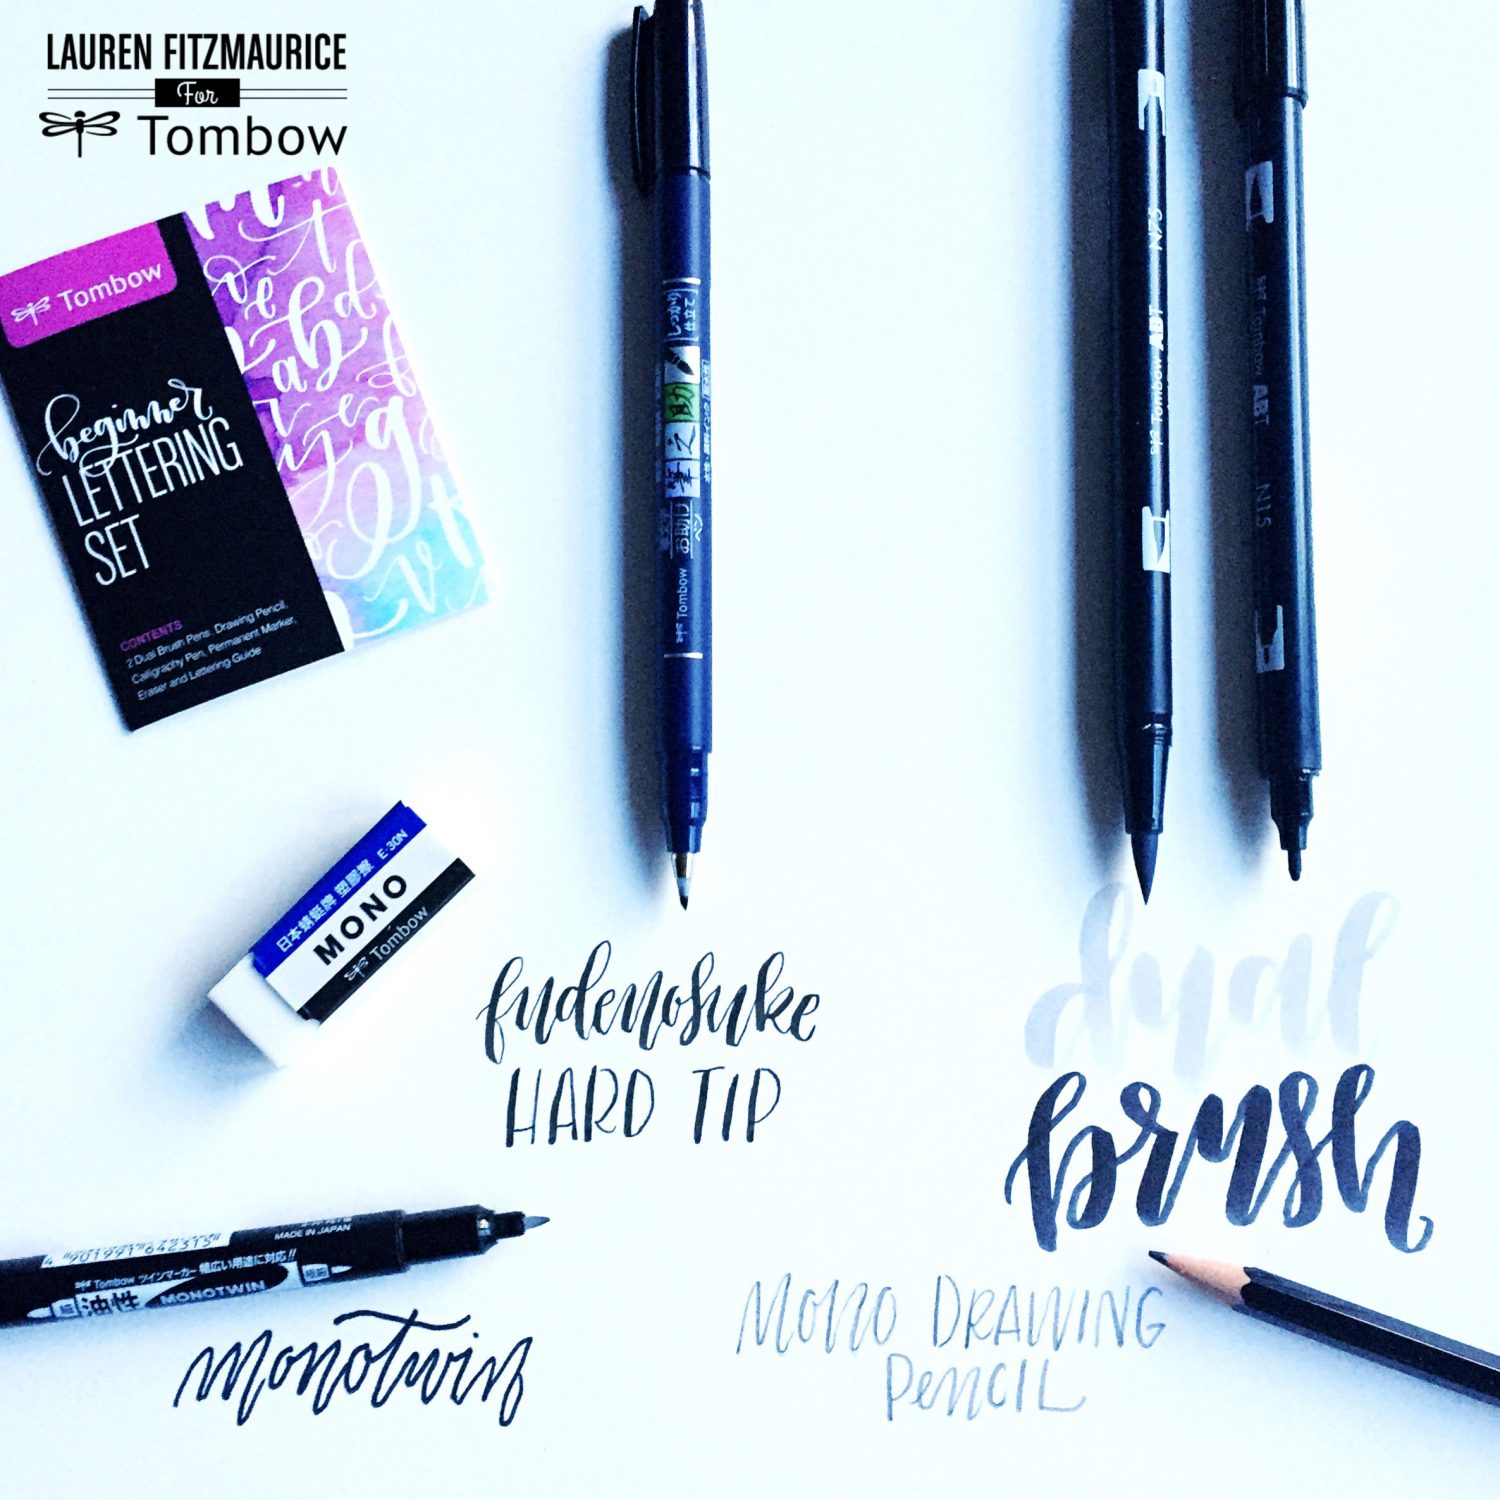 In my toolbox: A review of five brush calligraphy pens